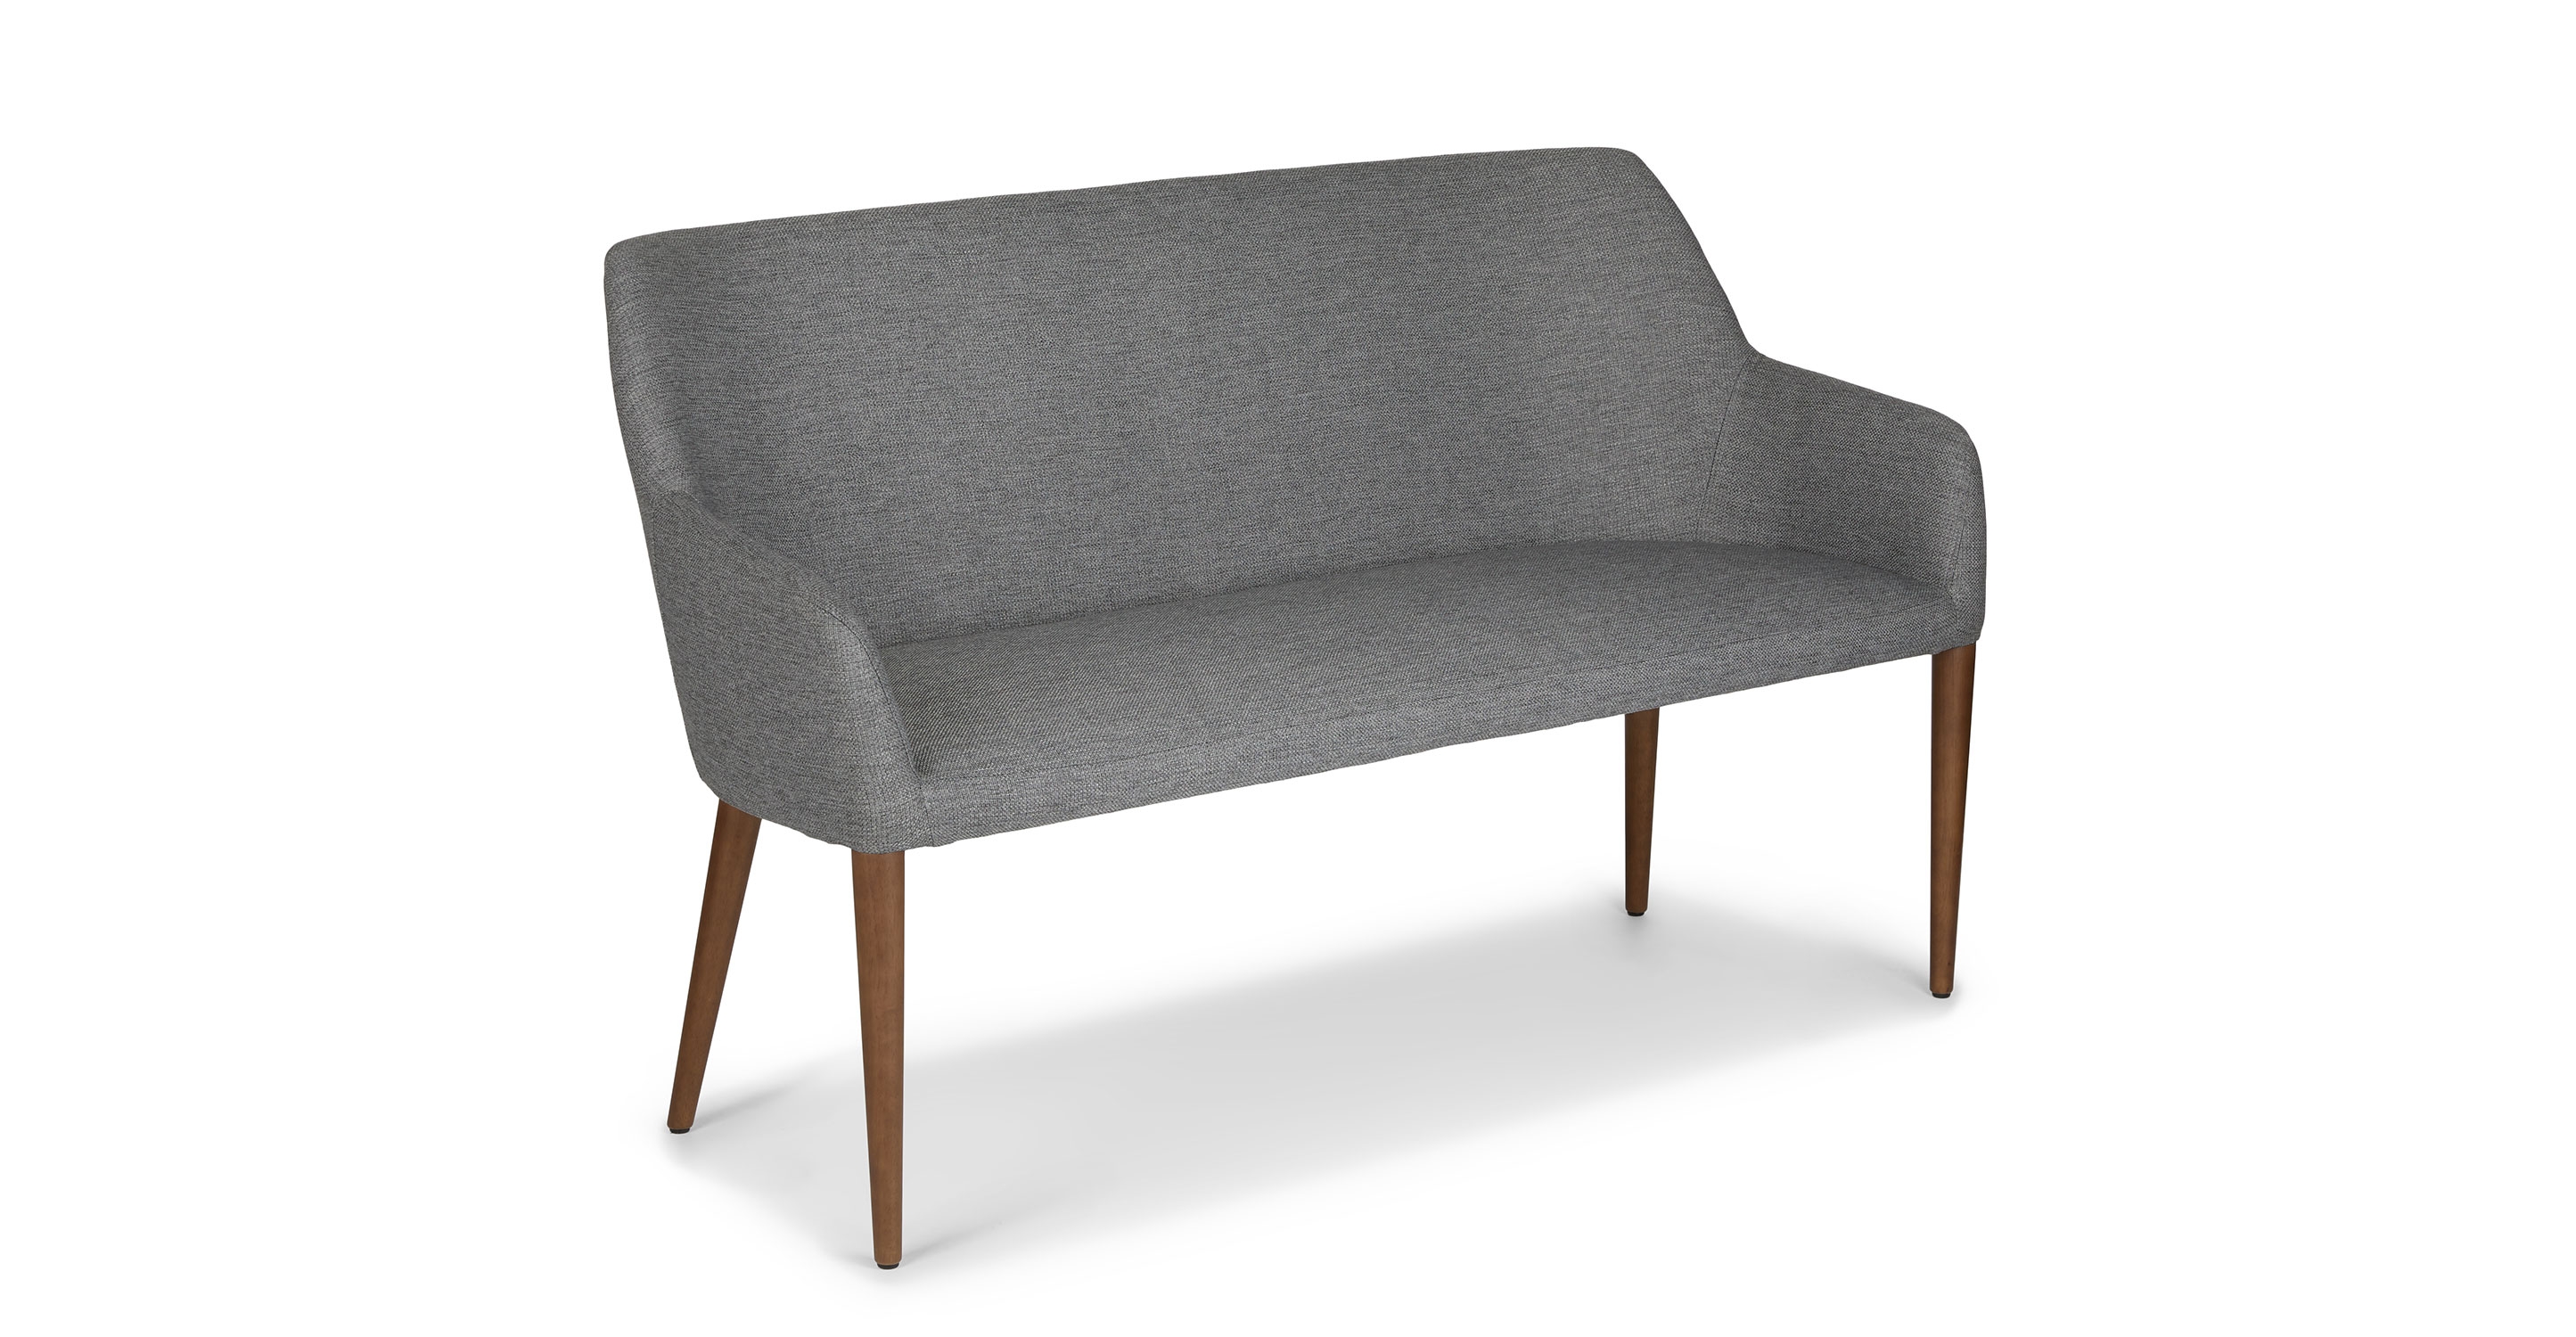 Feast Gravel Gray Dining Bench - Image 1